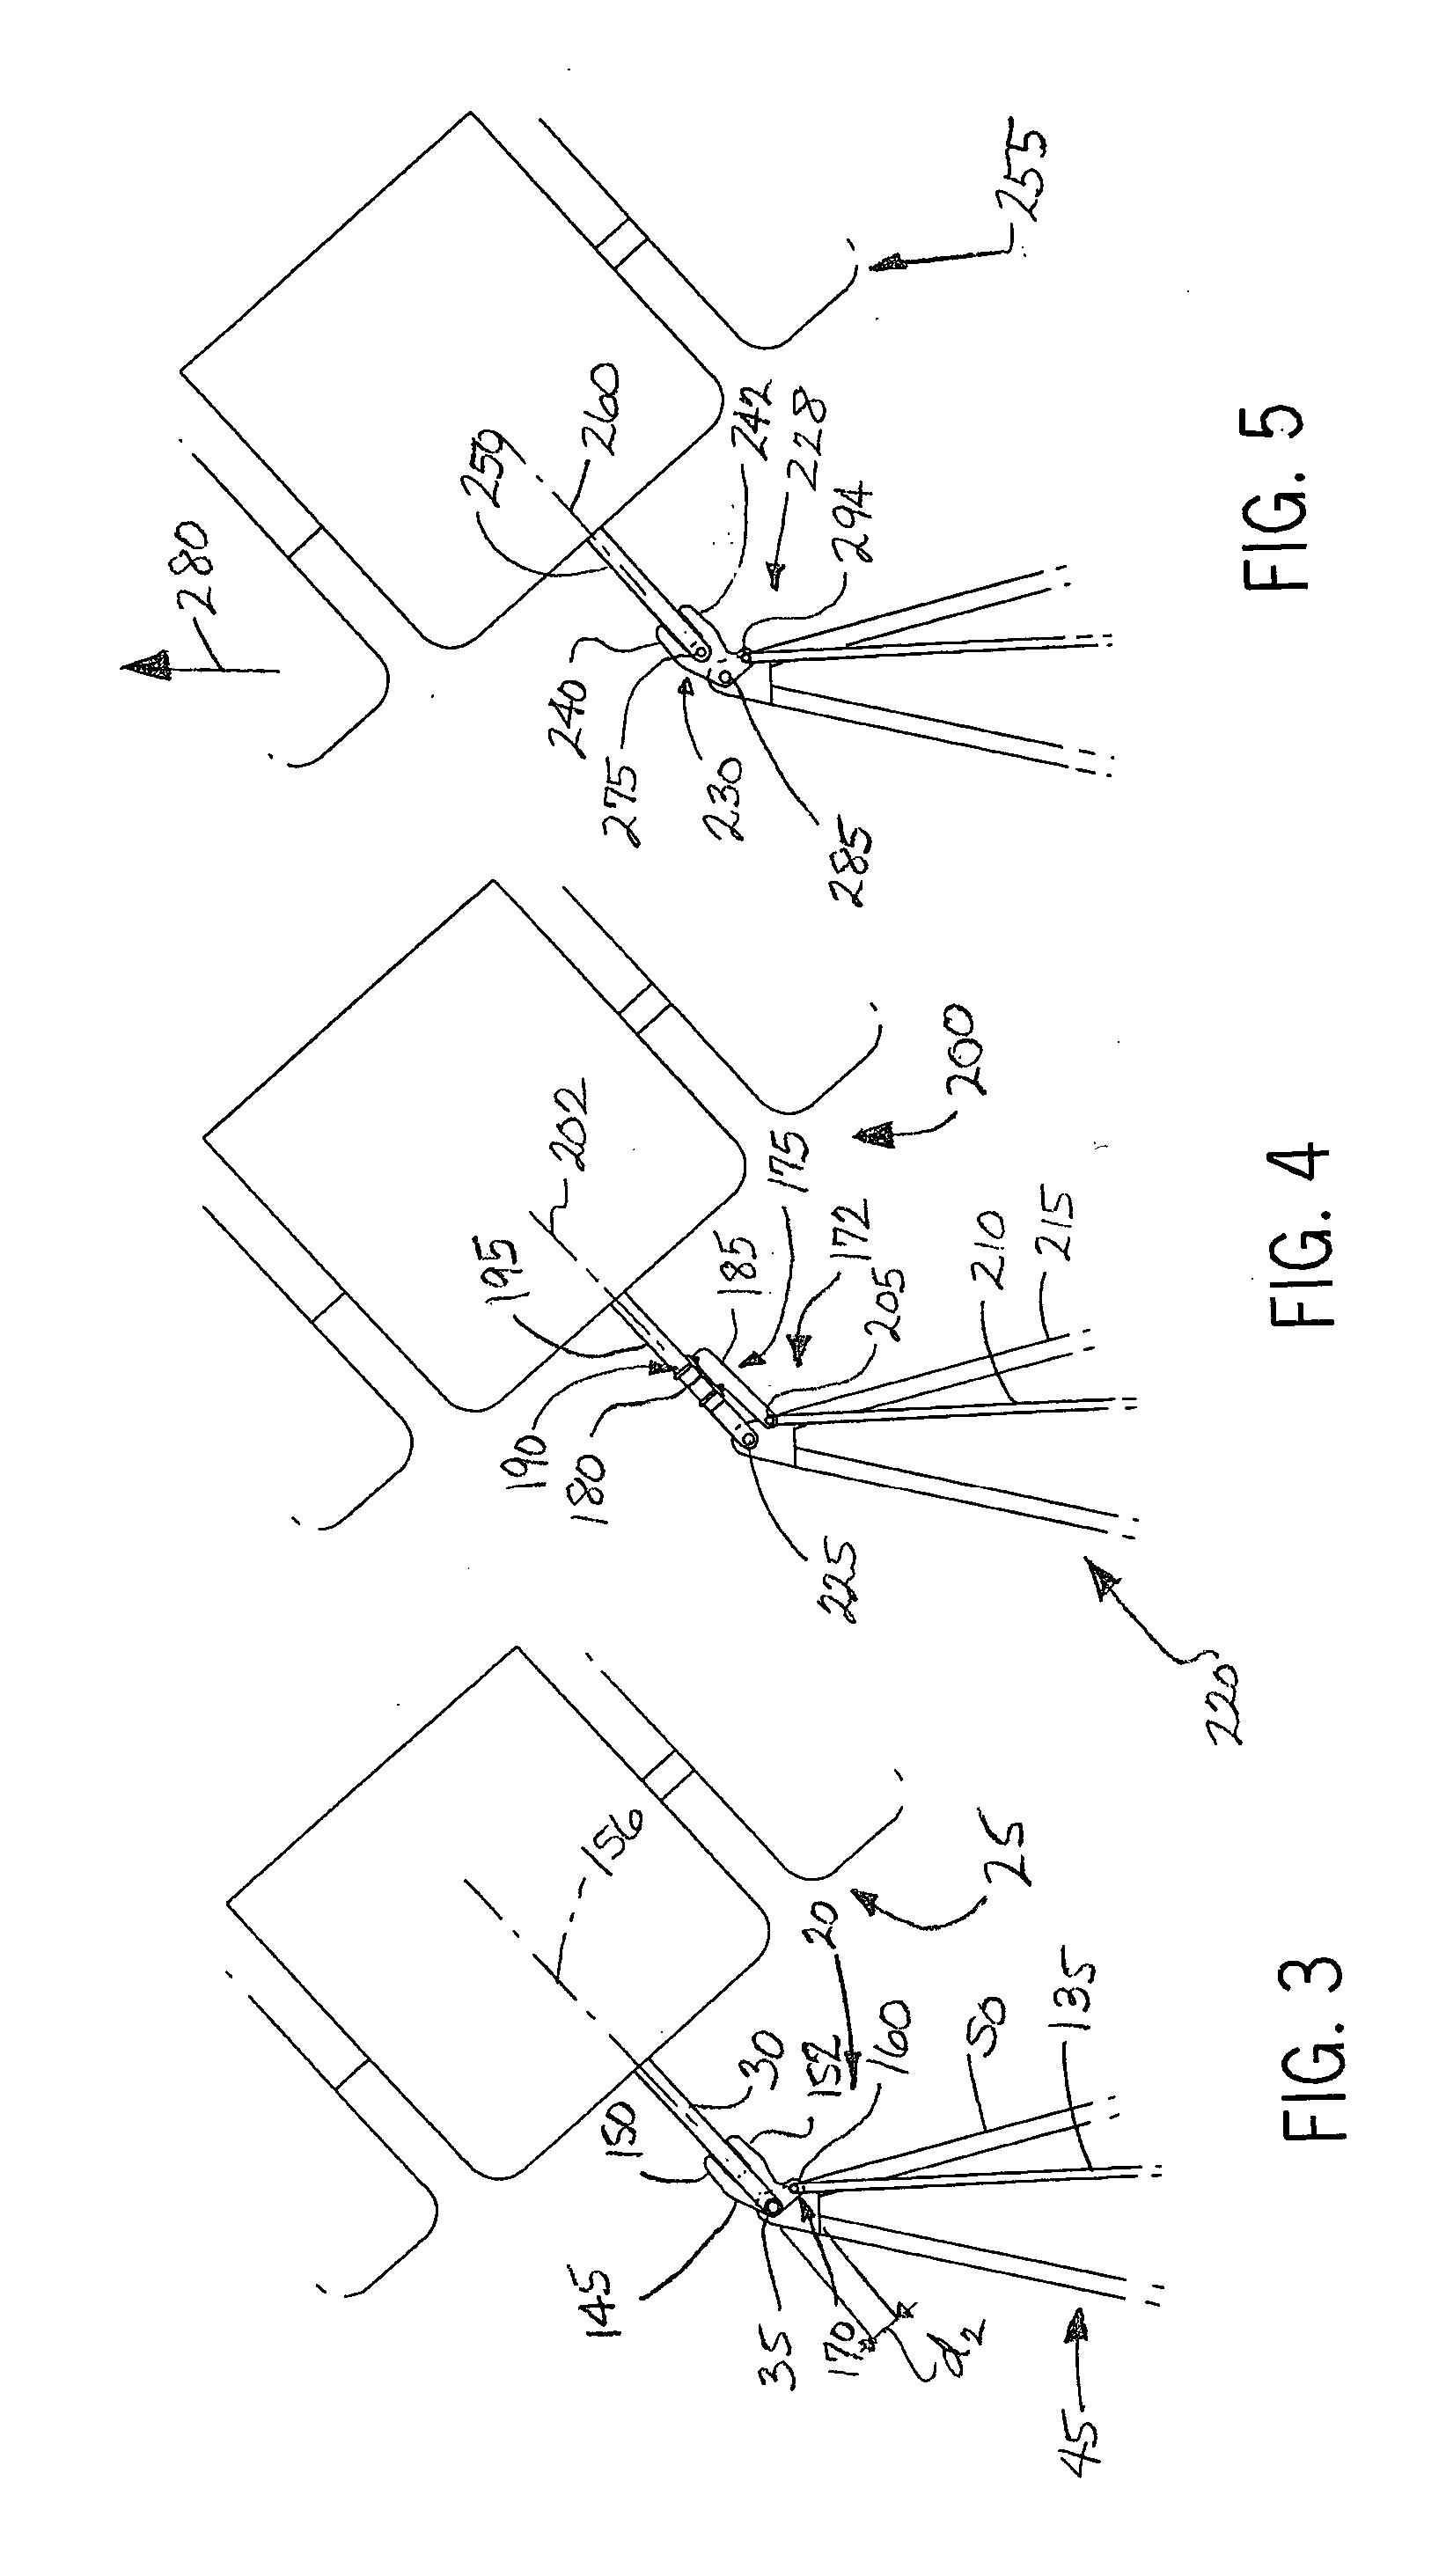 Steering connection assembly between multiple towed implements